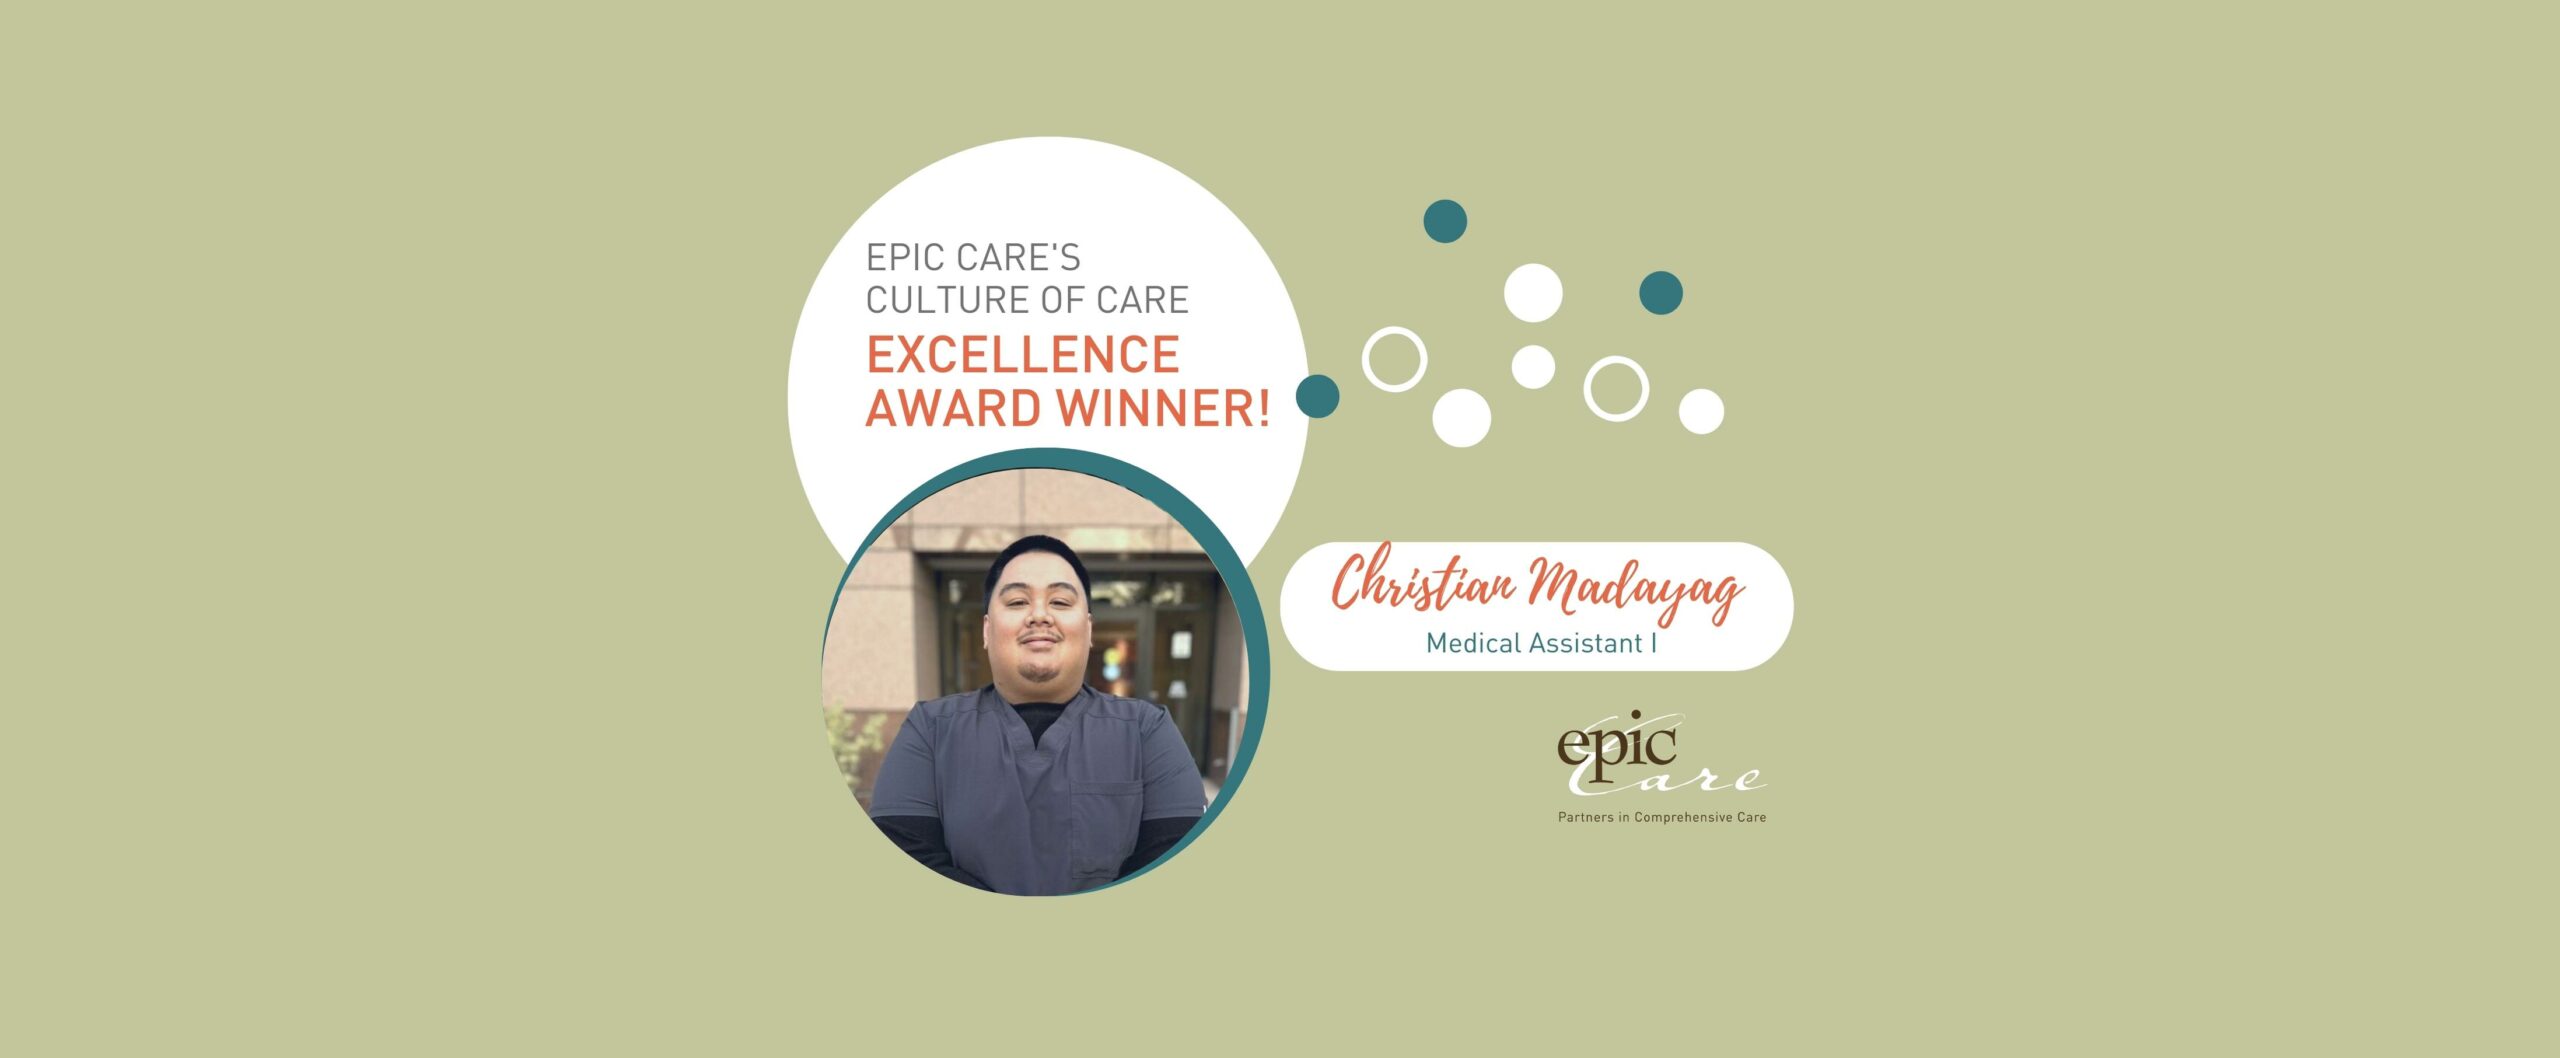 Epic Care’s Culture of CARE Excellence Award Winner! – Christian Madayag